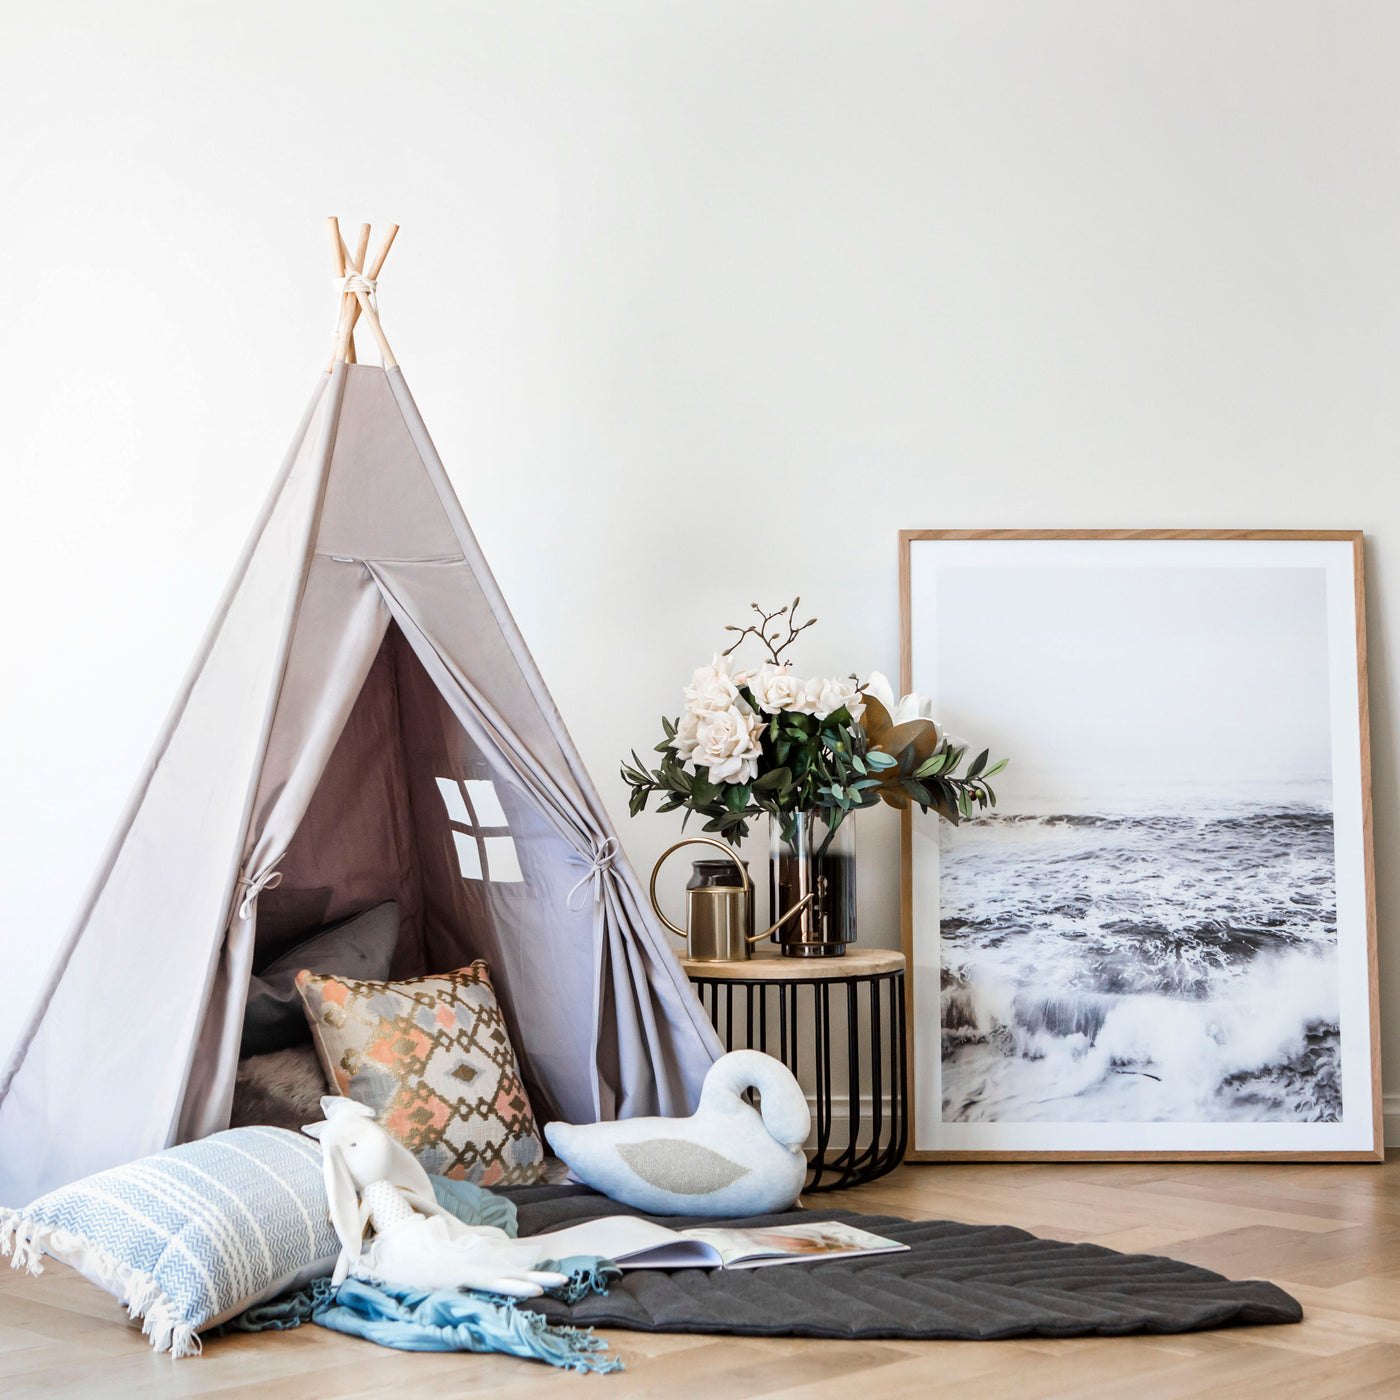 Cattywampus Wild Dove kids teepee tent in grey colour styled in home for a kids play space